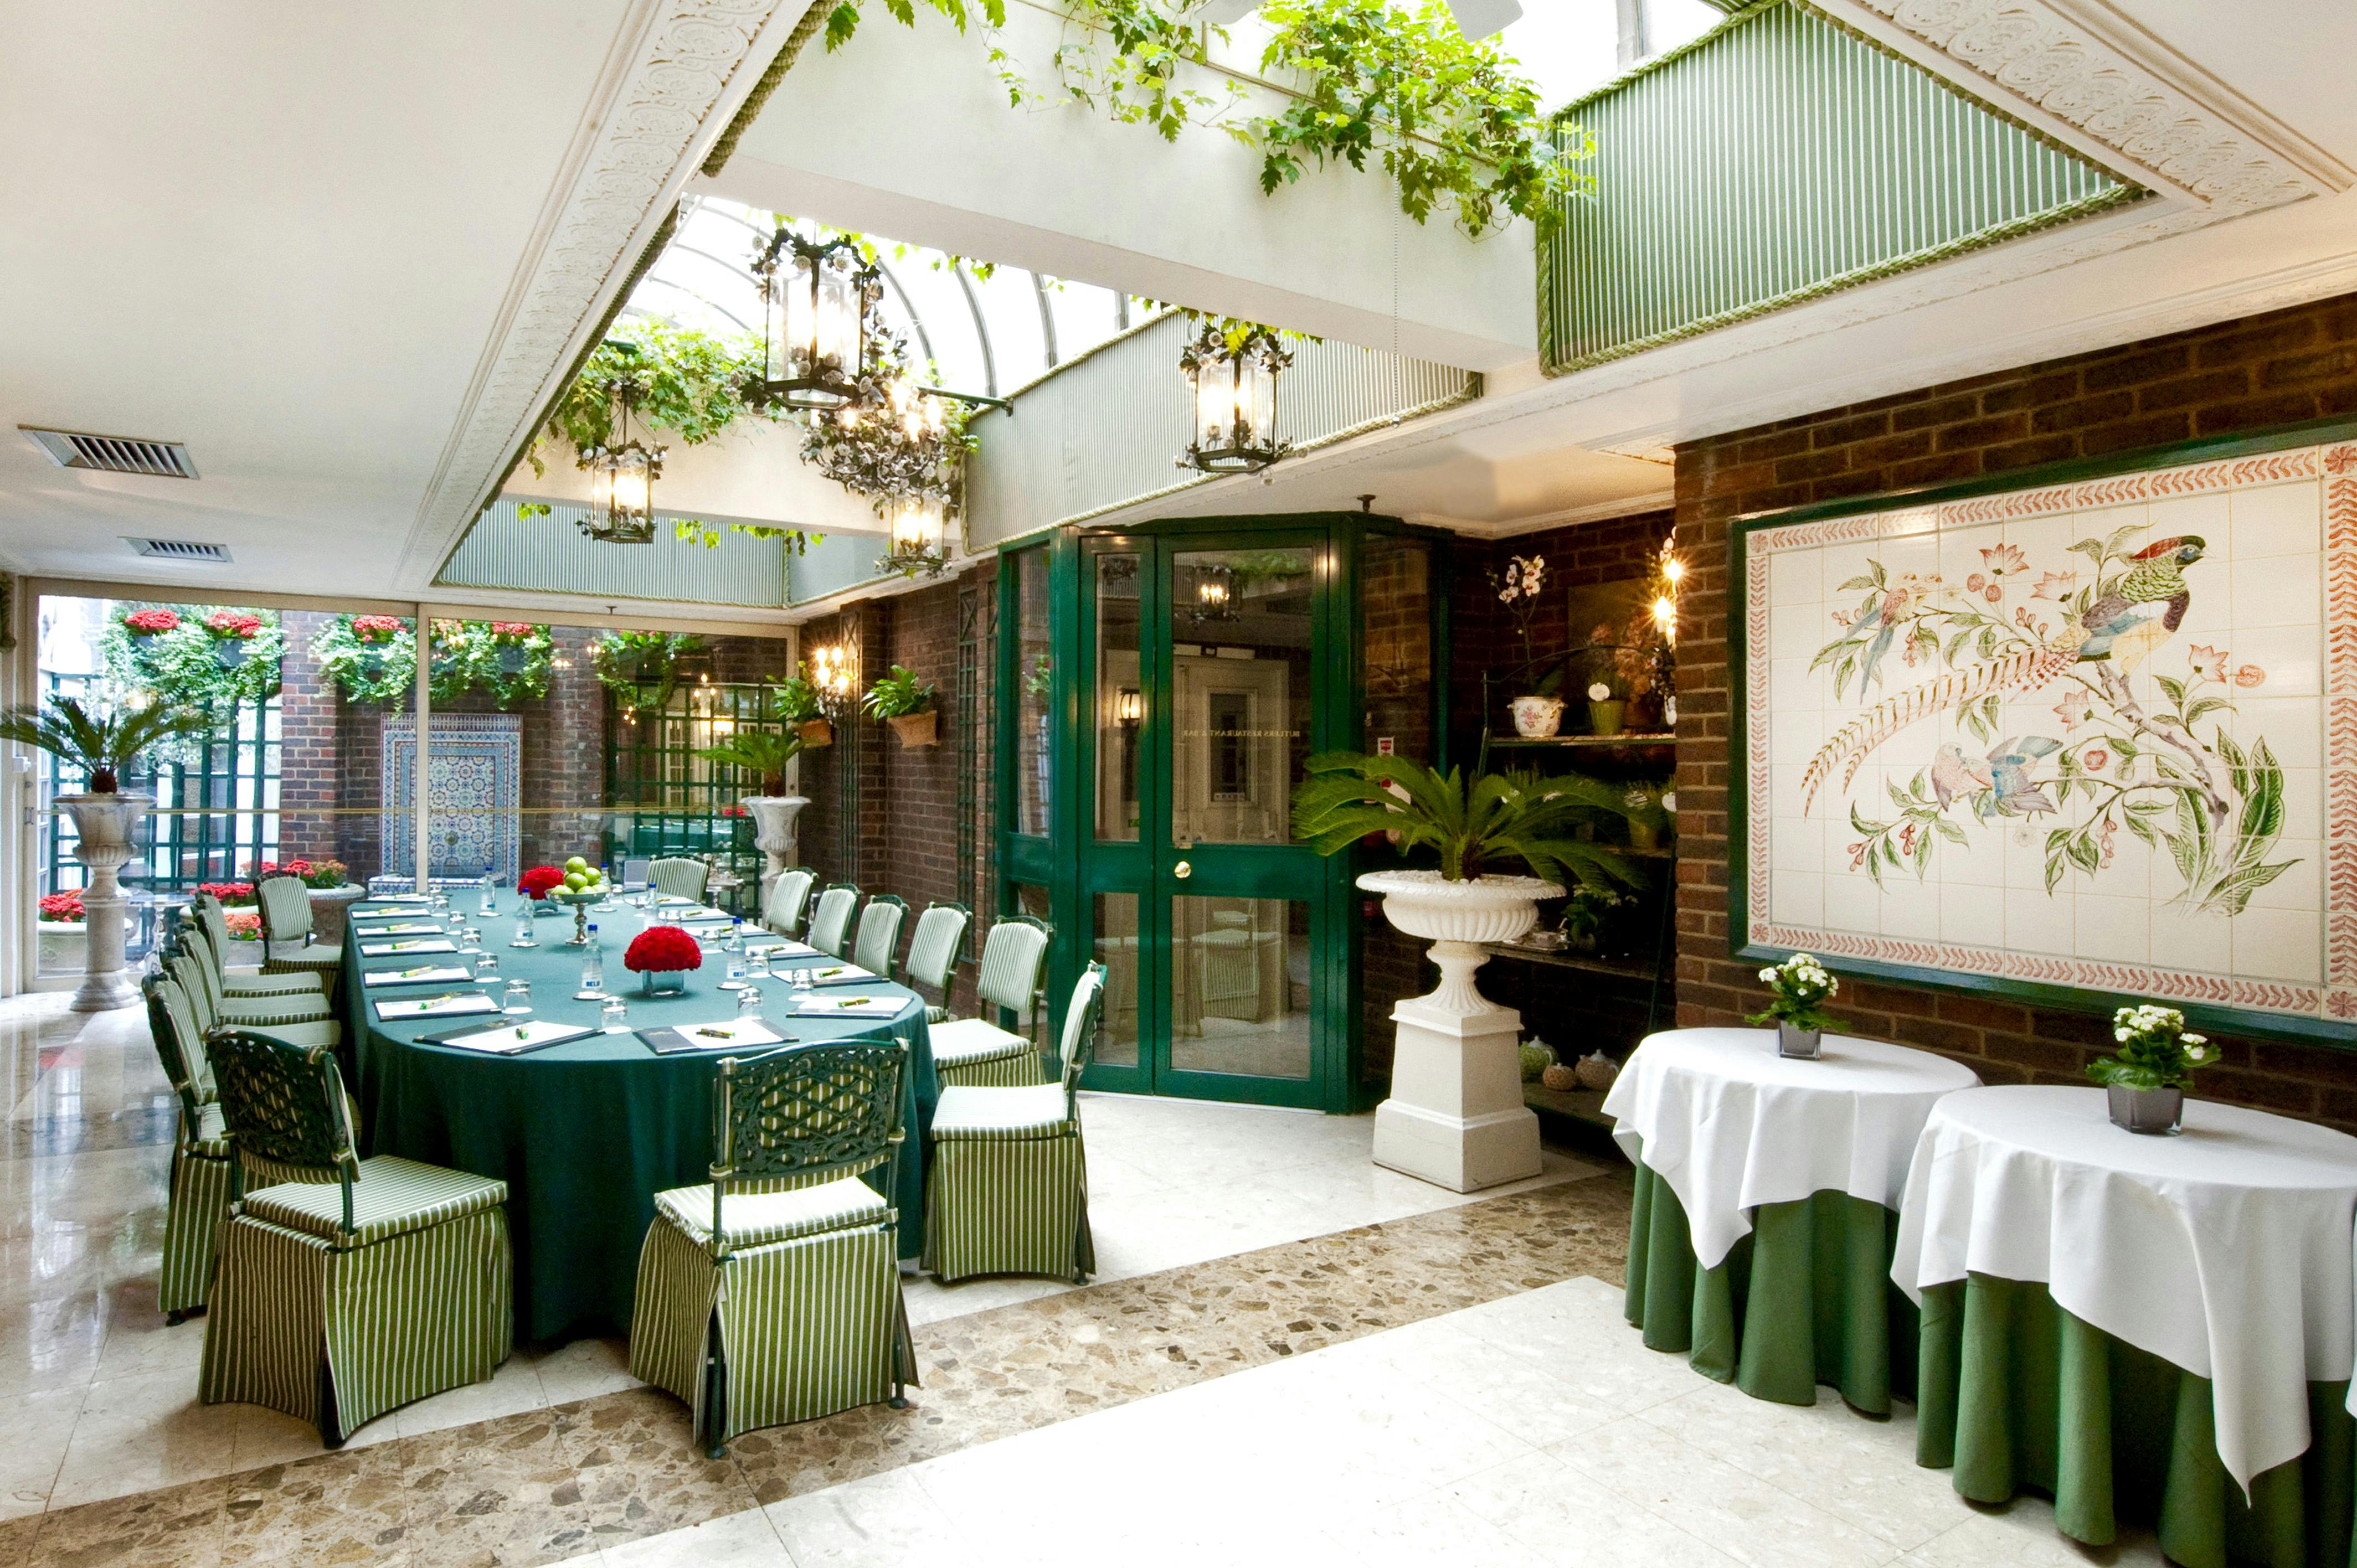 The Chesterfield Mayfair Hotel: The Conservatory